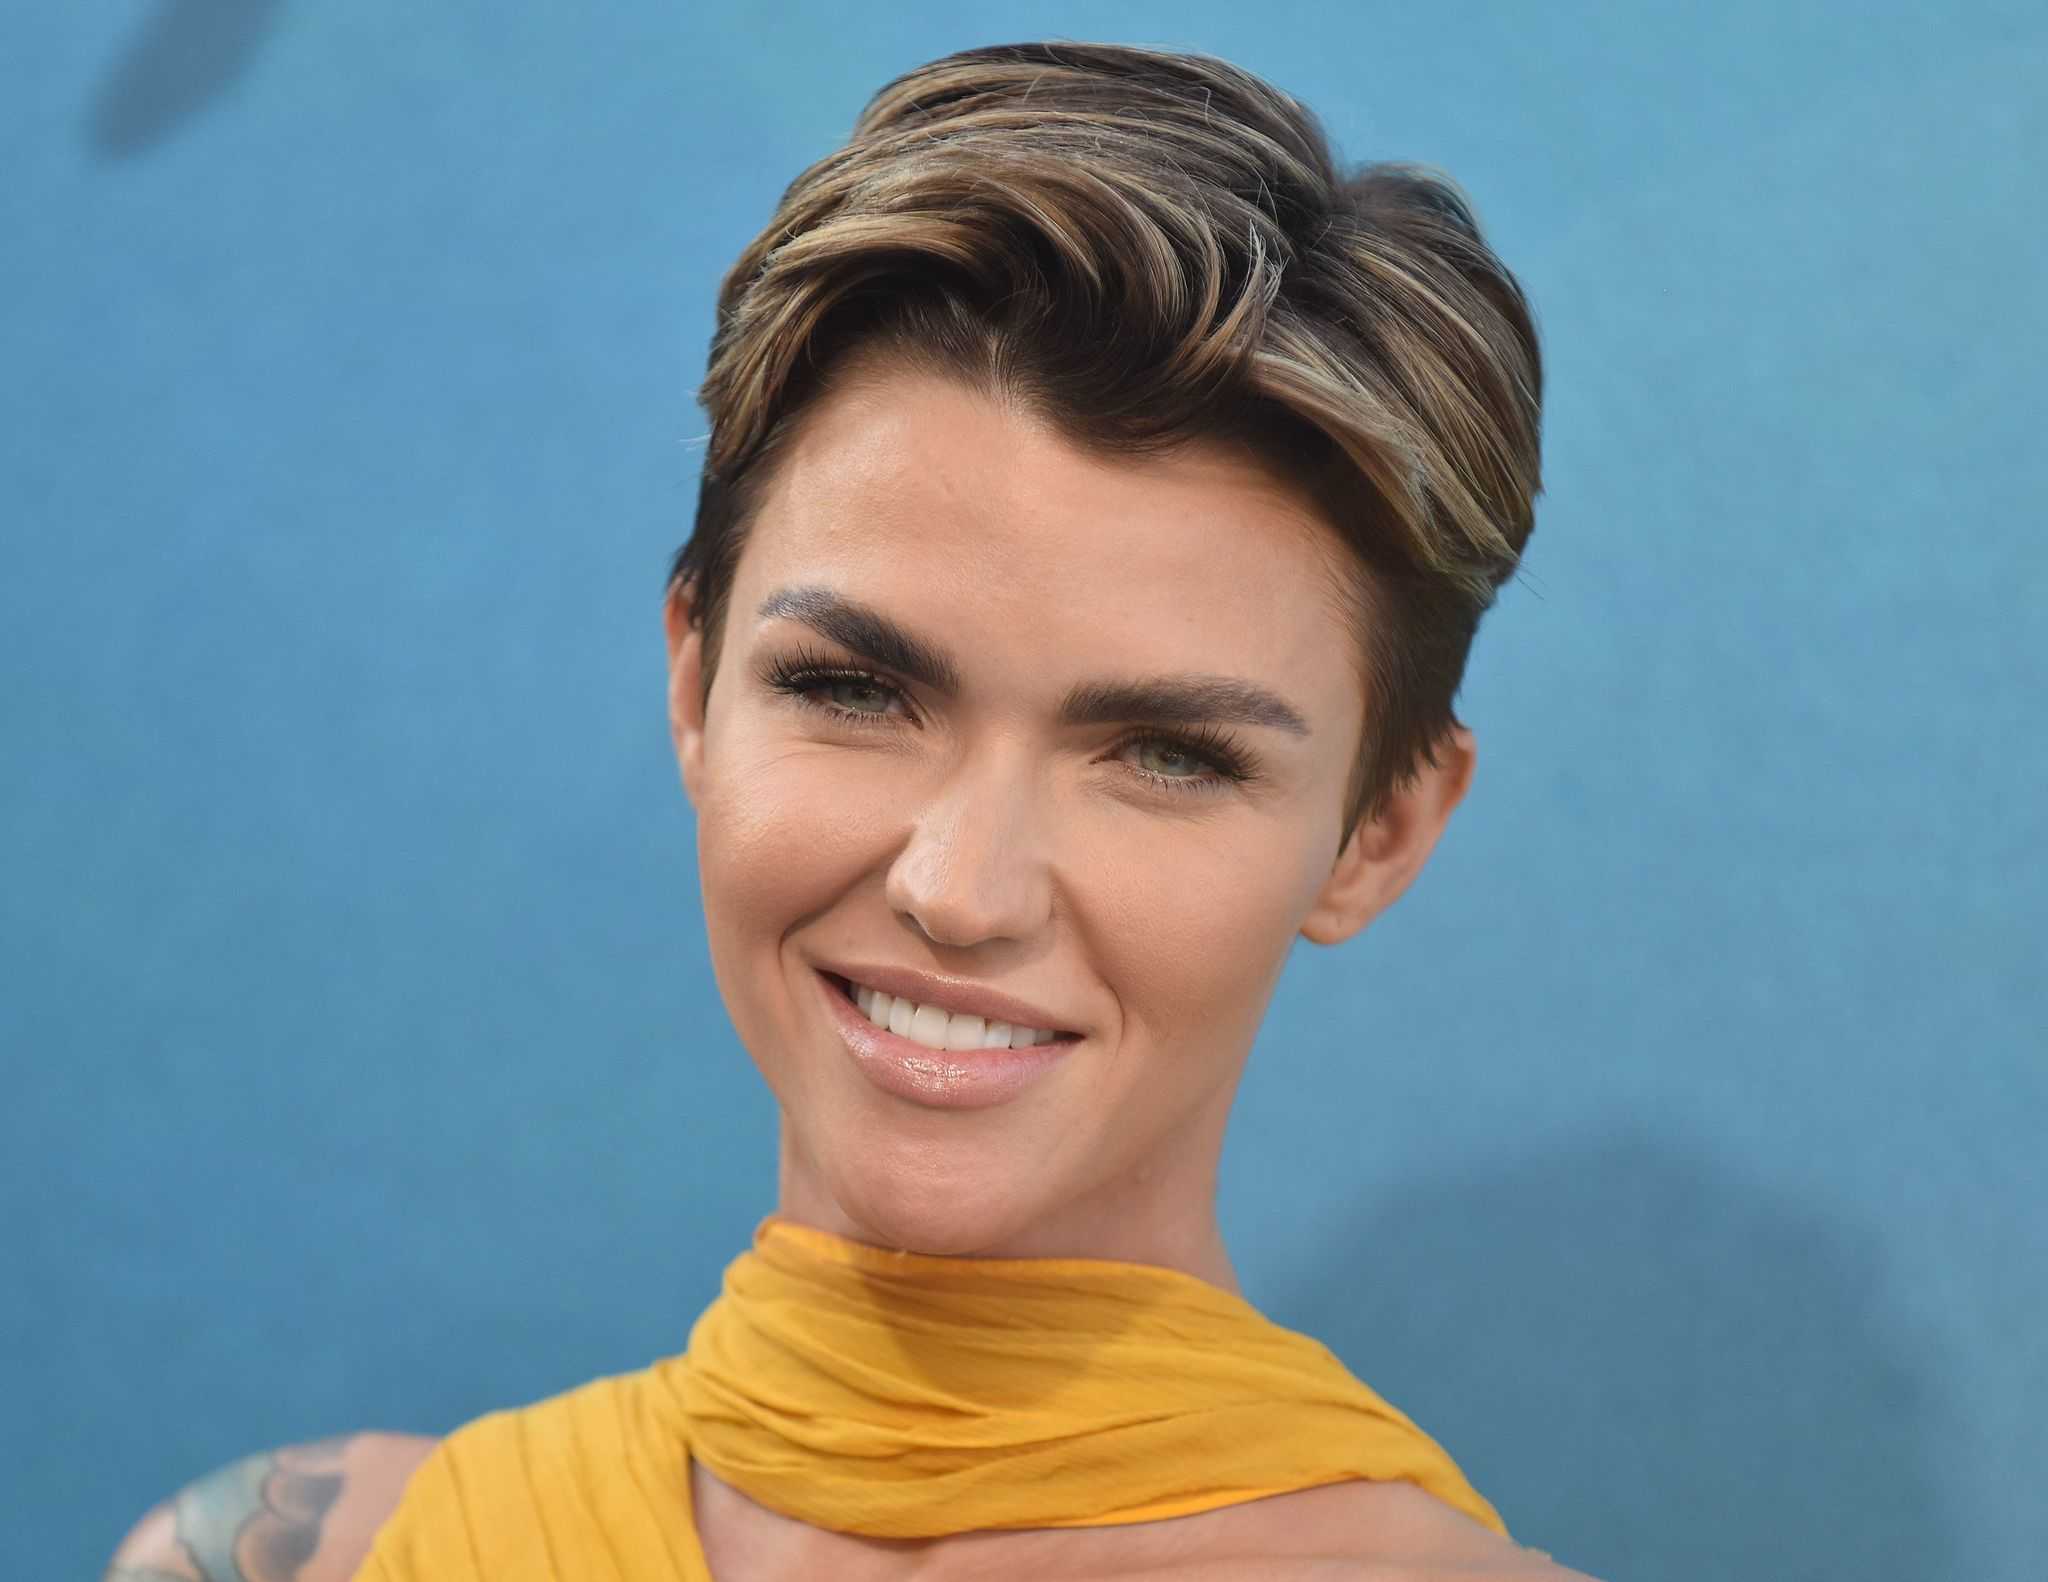 70+ Hot Pictures Of Ruby Rose – Batgirl In Arrowverse And Orange Is The New Black Star. 17